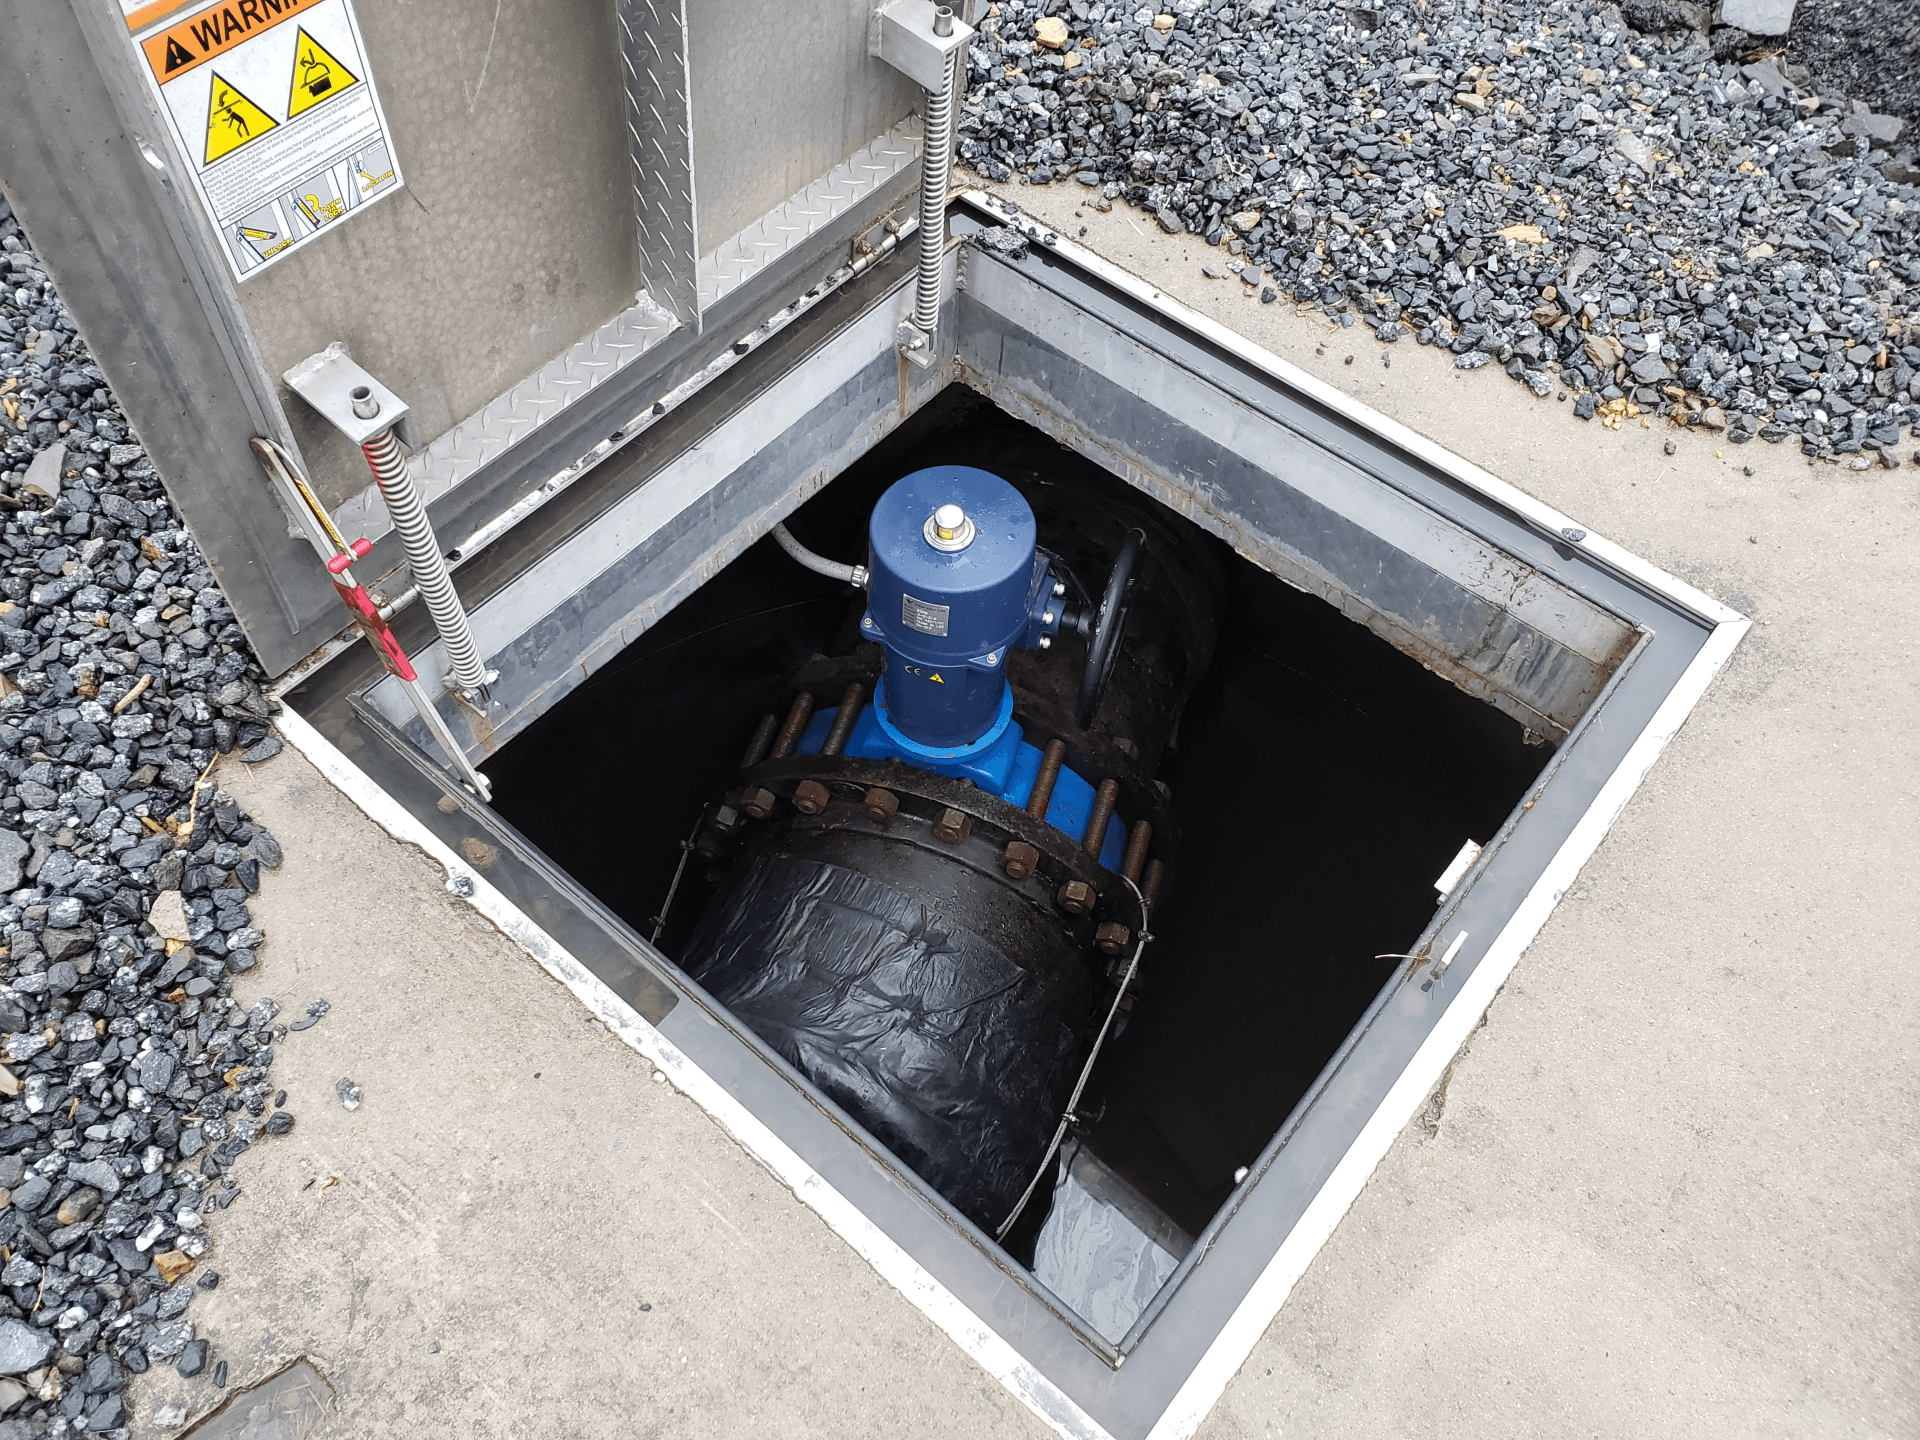 A blue pipe is sitting in a manhole cover.